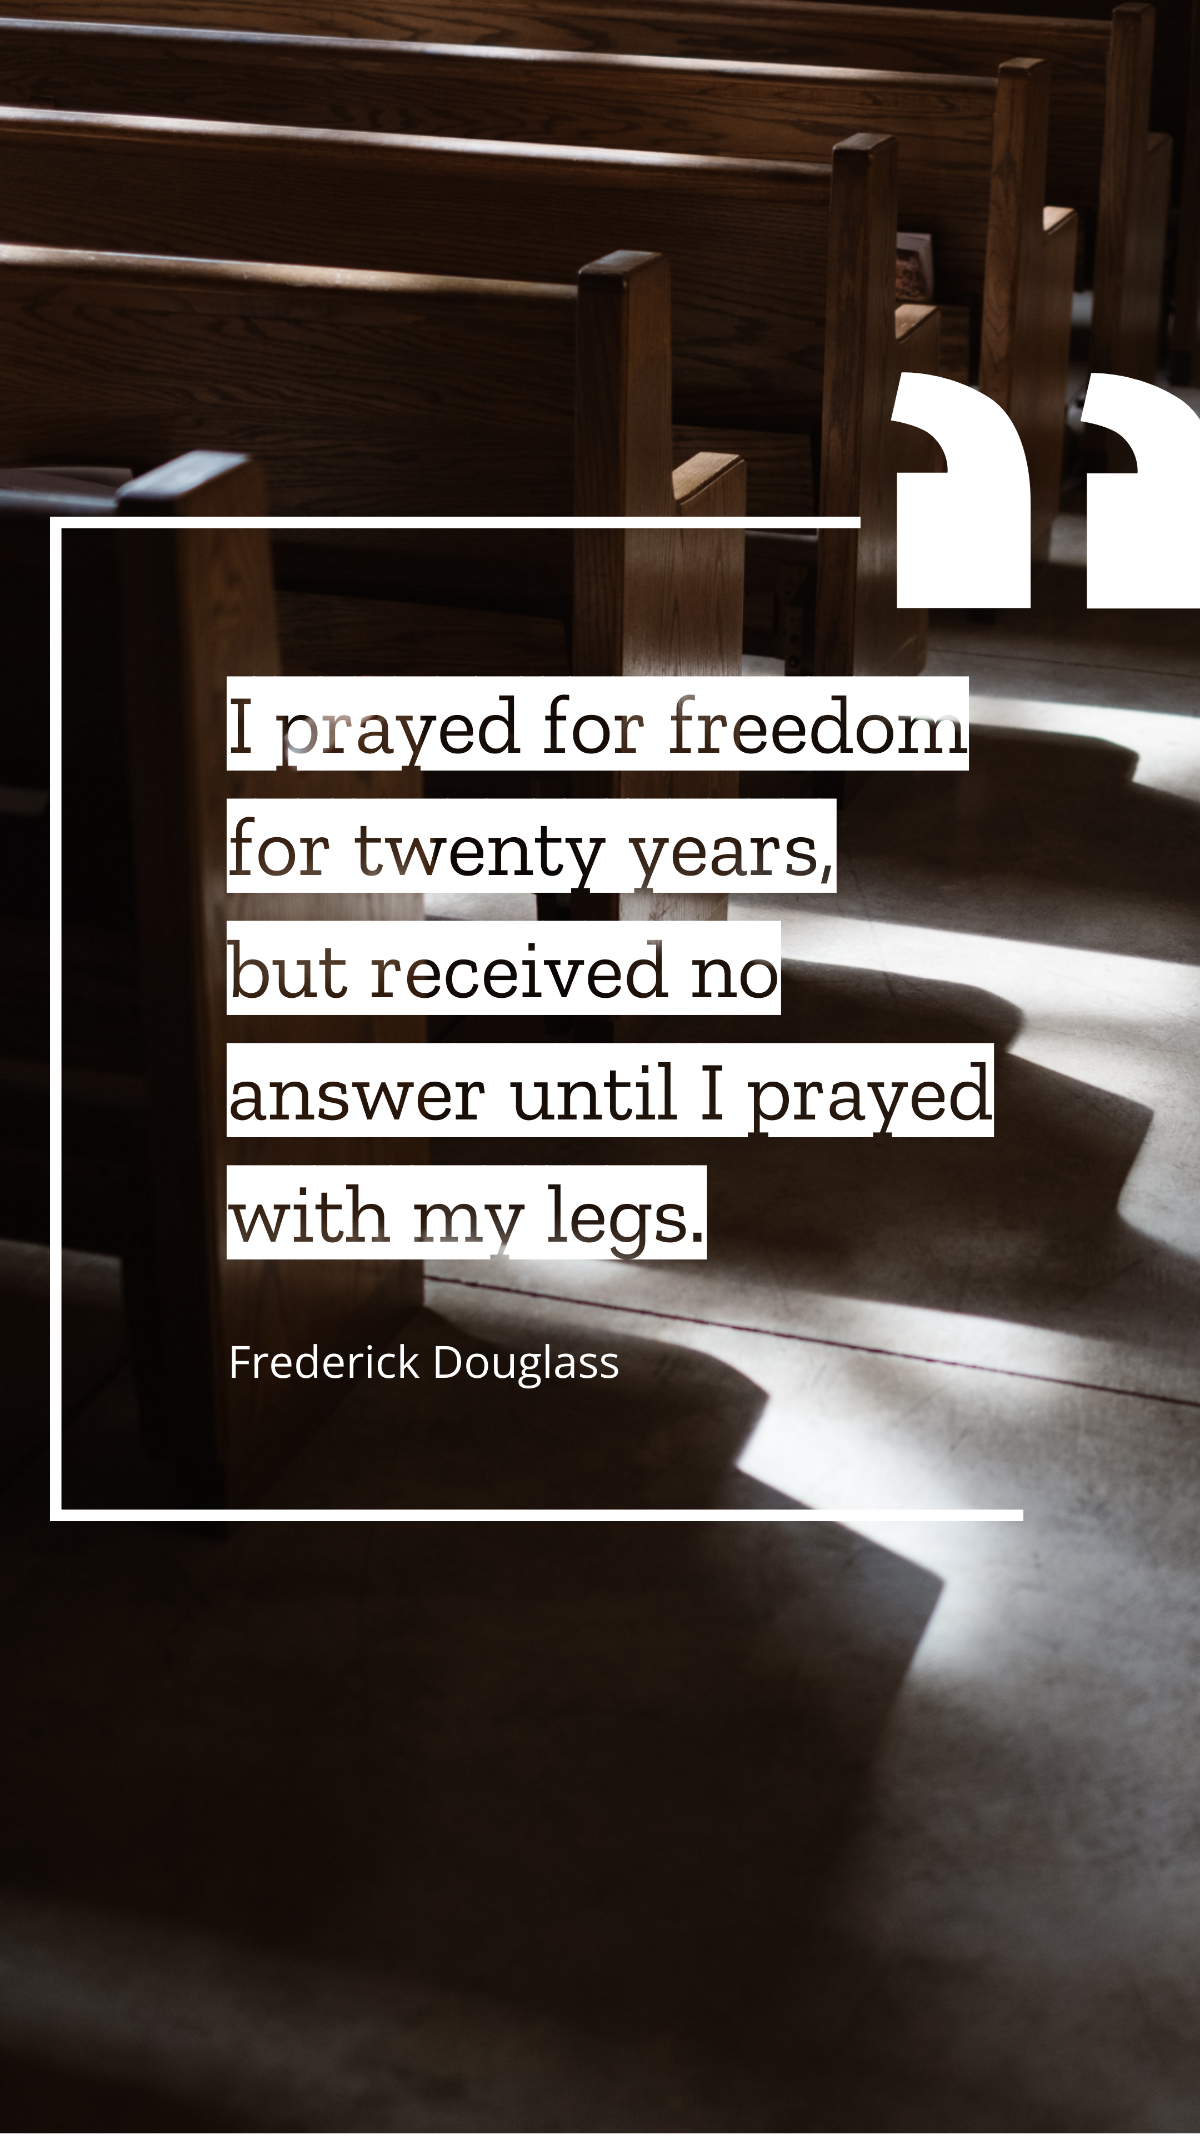 Frederick Douglass - I prayed for freedom for twenty years, but received no answer until I prayed with my legs. Template